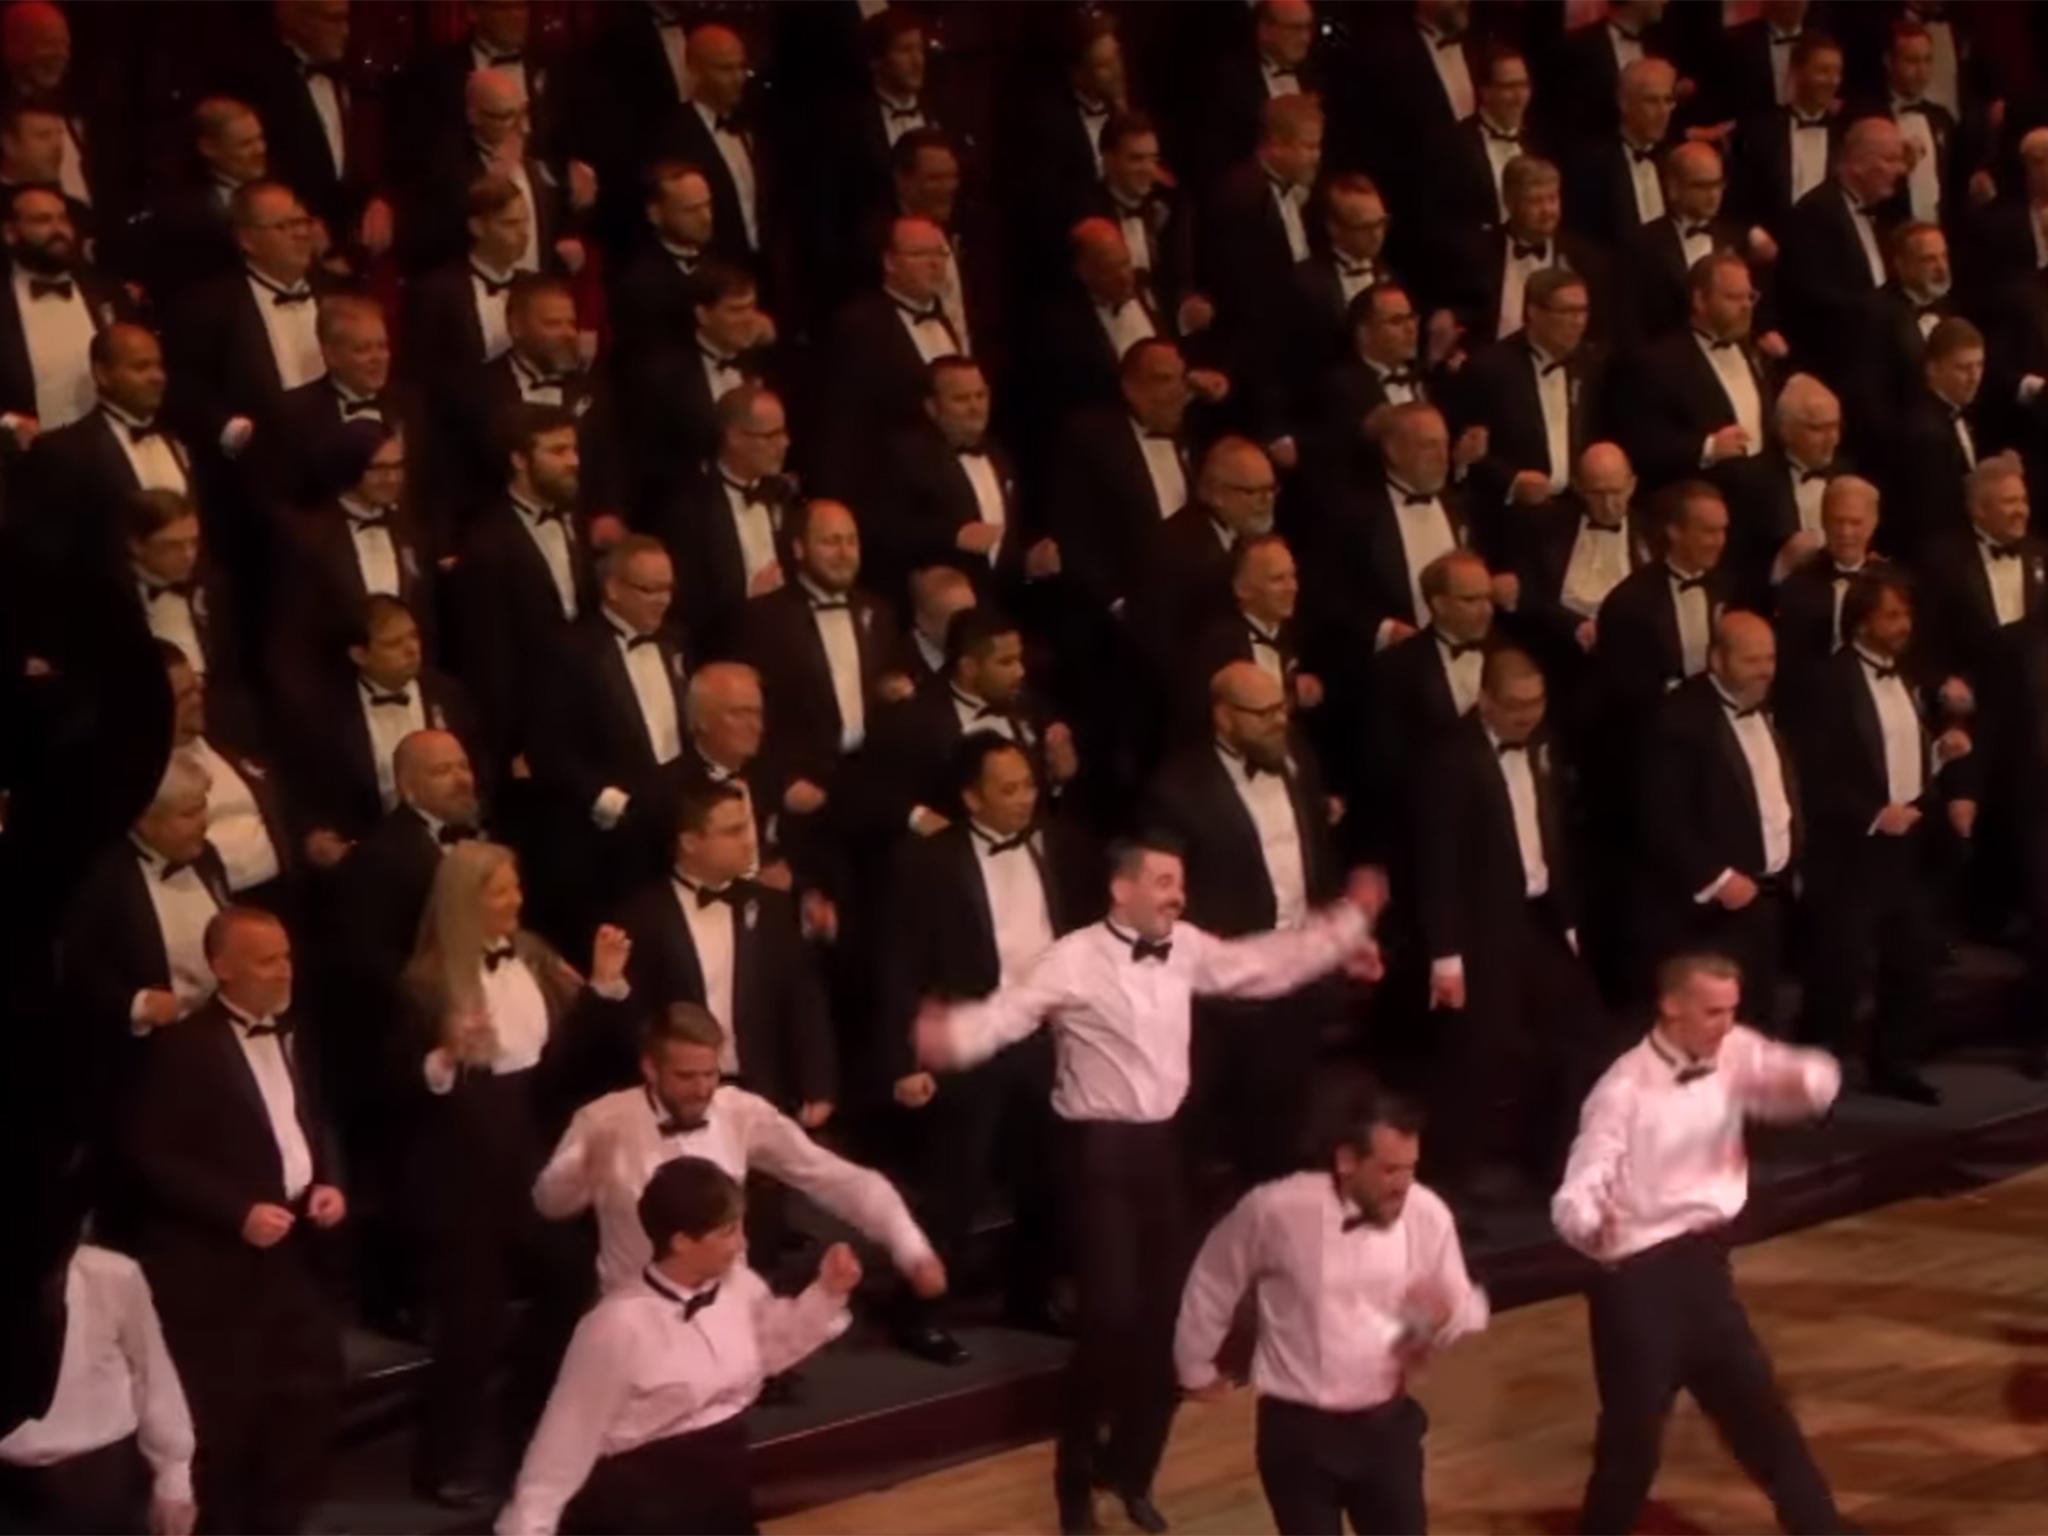 The Portland Gay Men's Chorus performing in the finale of its 2016 Pride concert